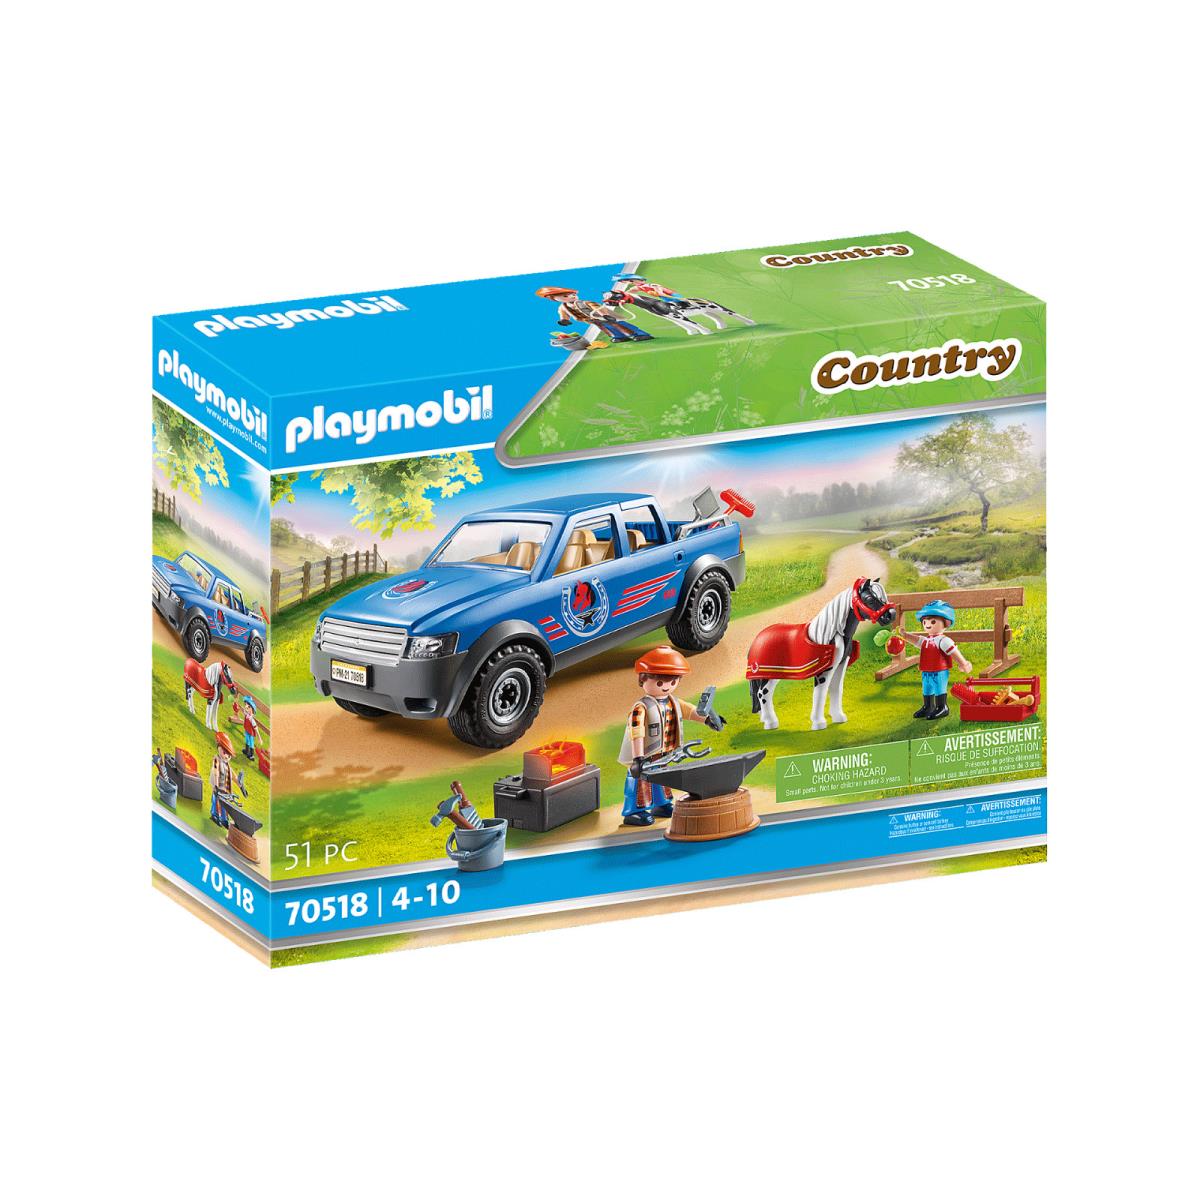 Playmobil Country 70518 Mobile Farrier Mib/new